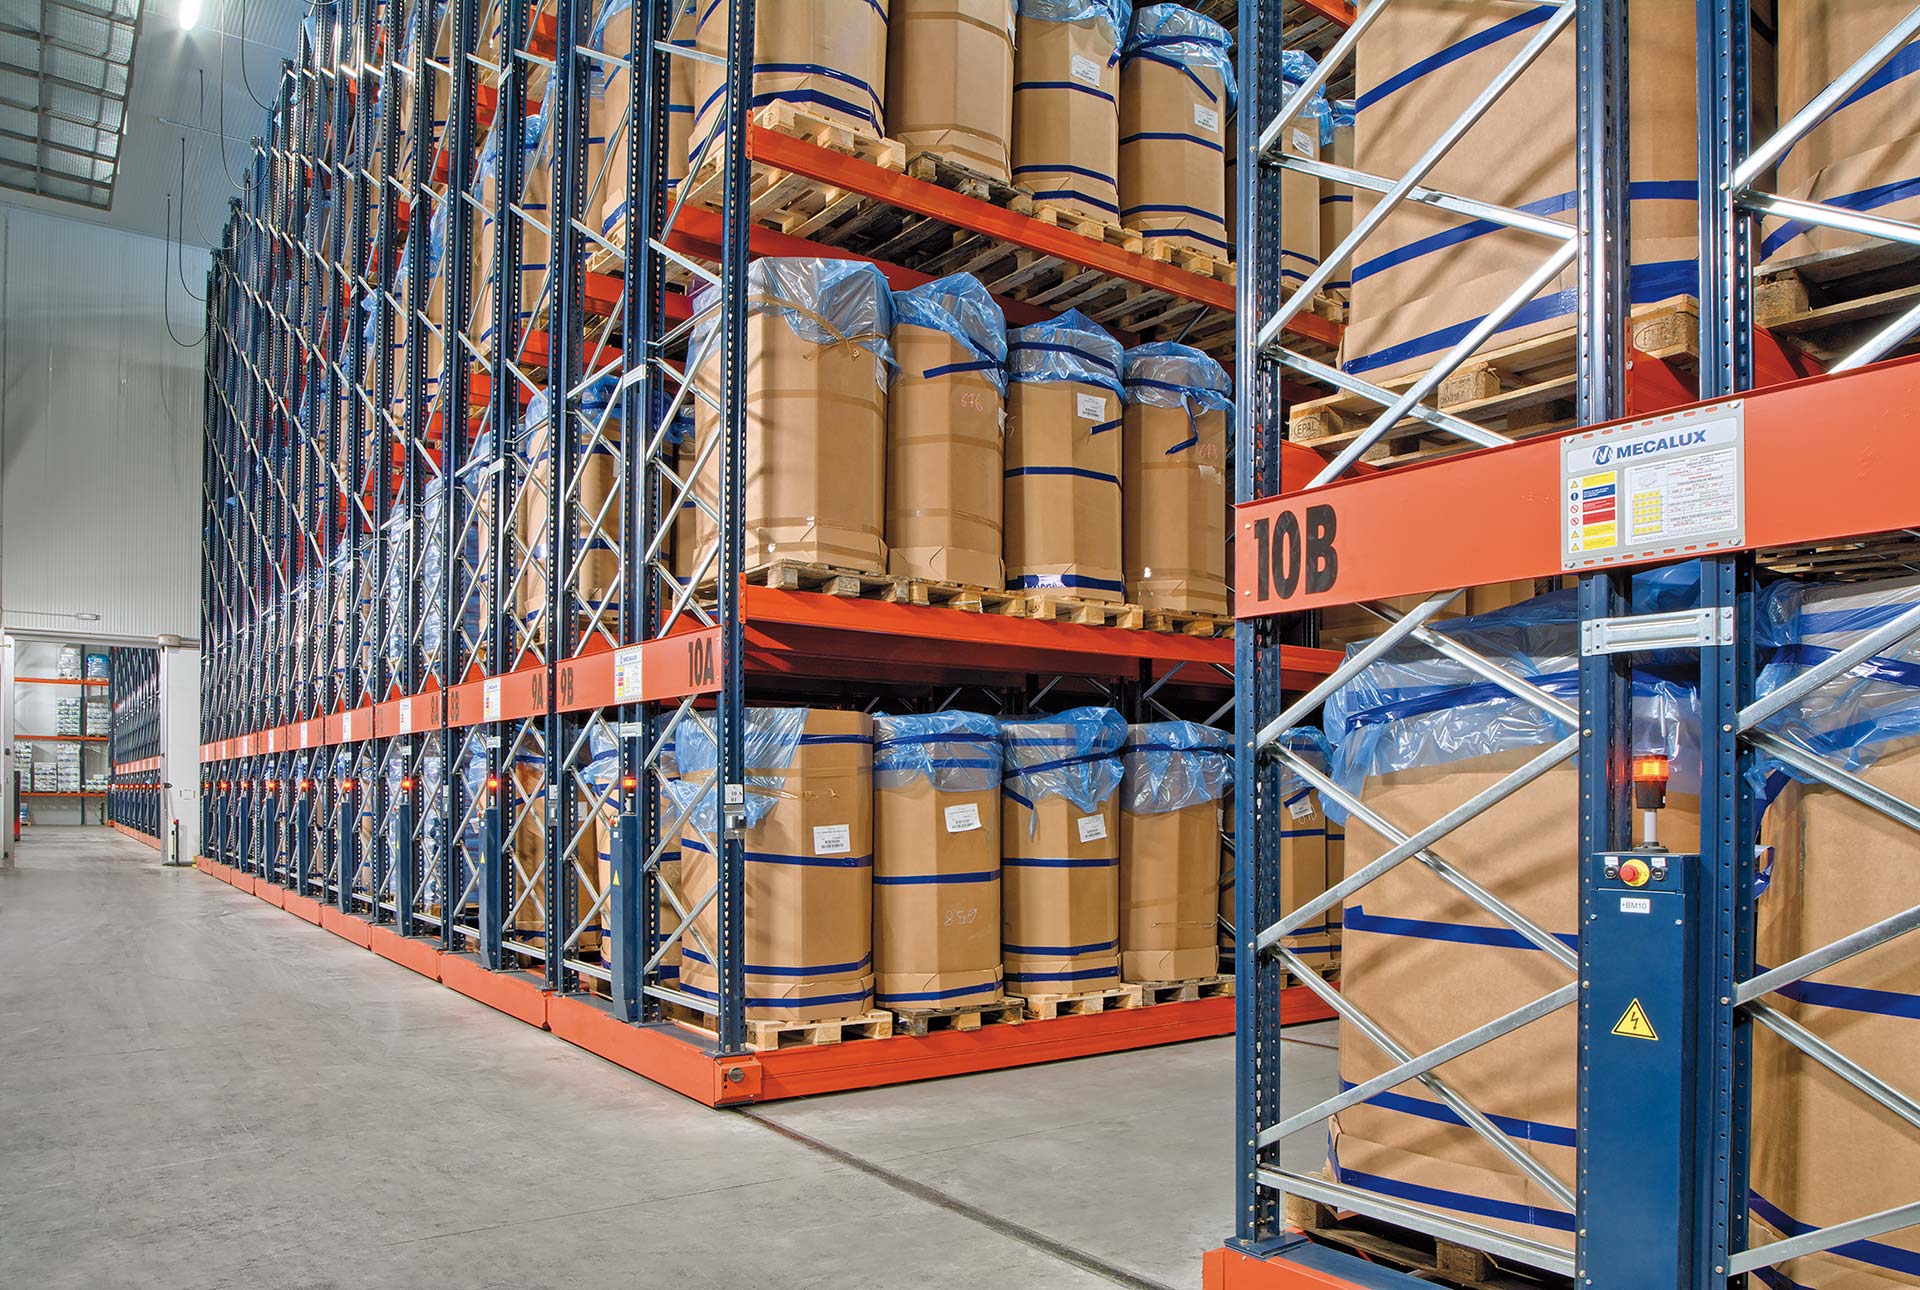 Moving racks combine maximum high-density storage with direct access to each pallet